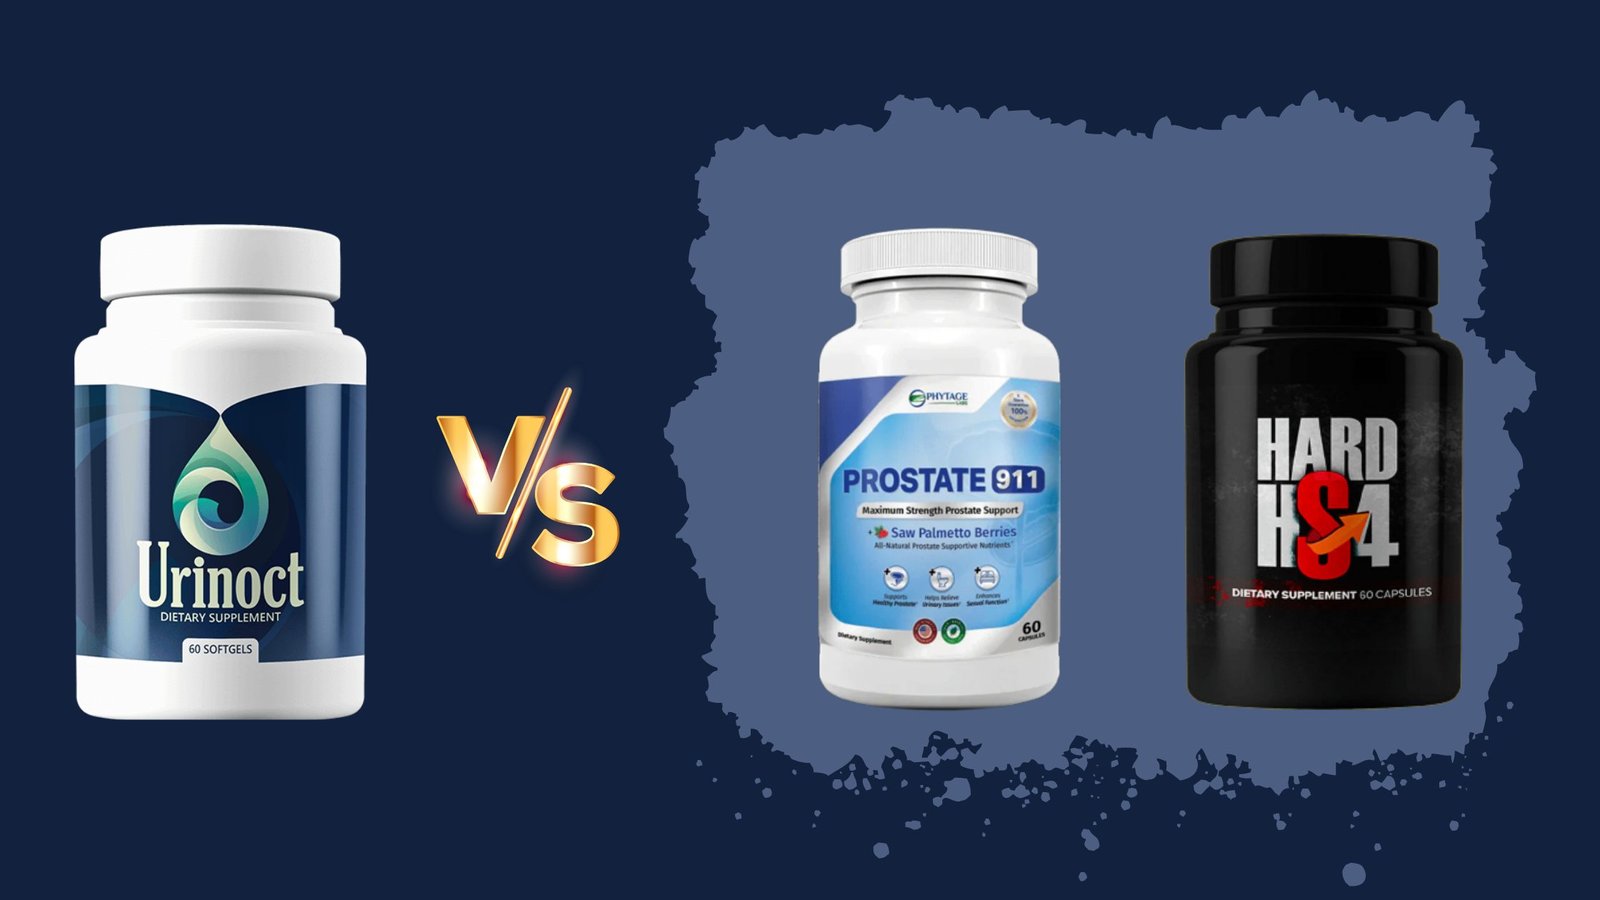 Urinoct vs other prostate supplements